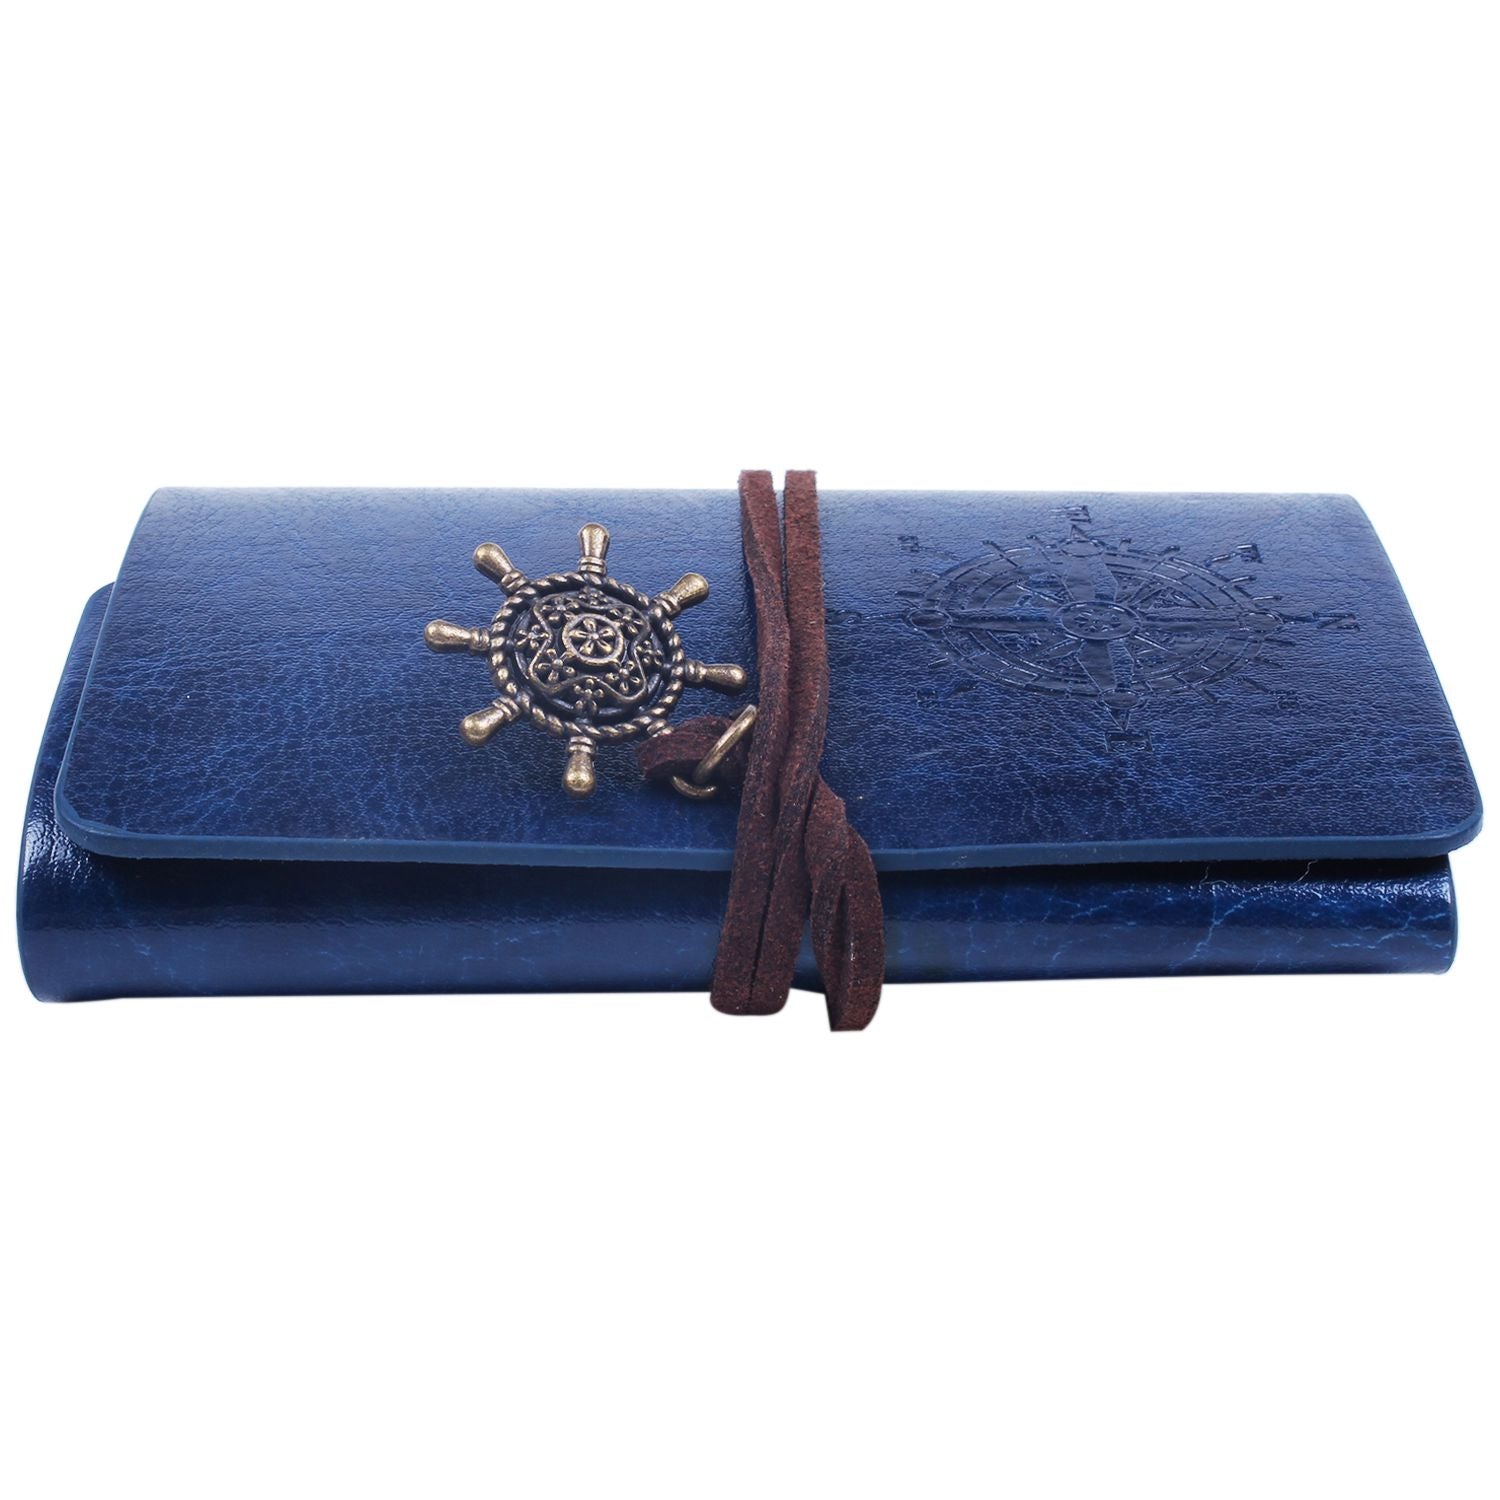 Practical Leather Business Card Holder Identity Card Holder Wallet - ebowsos